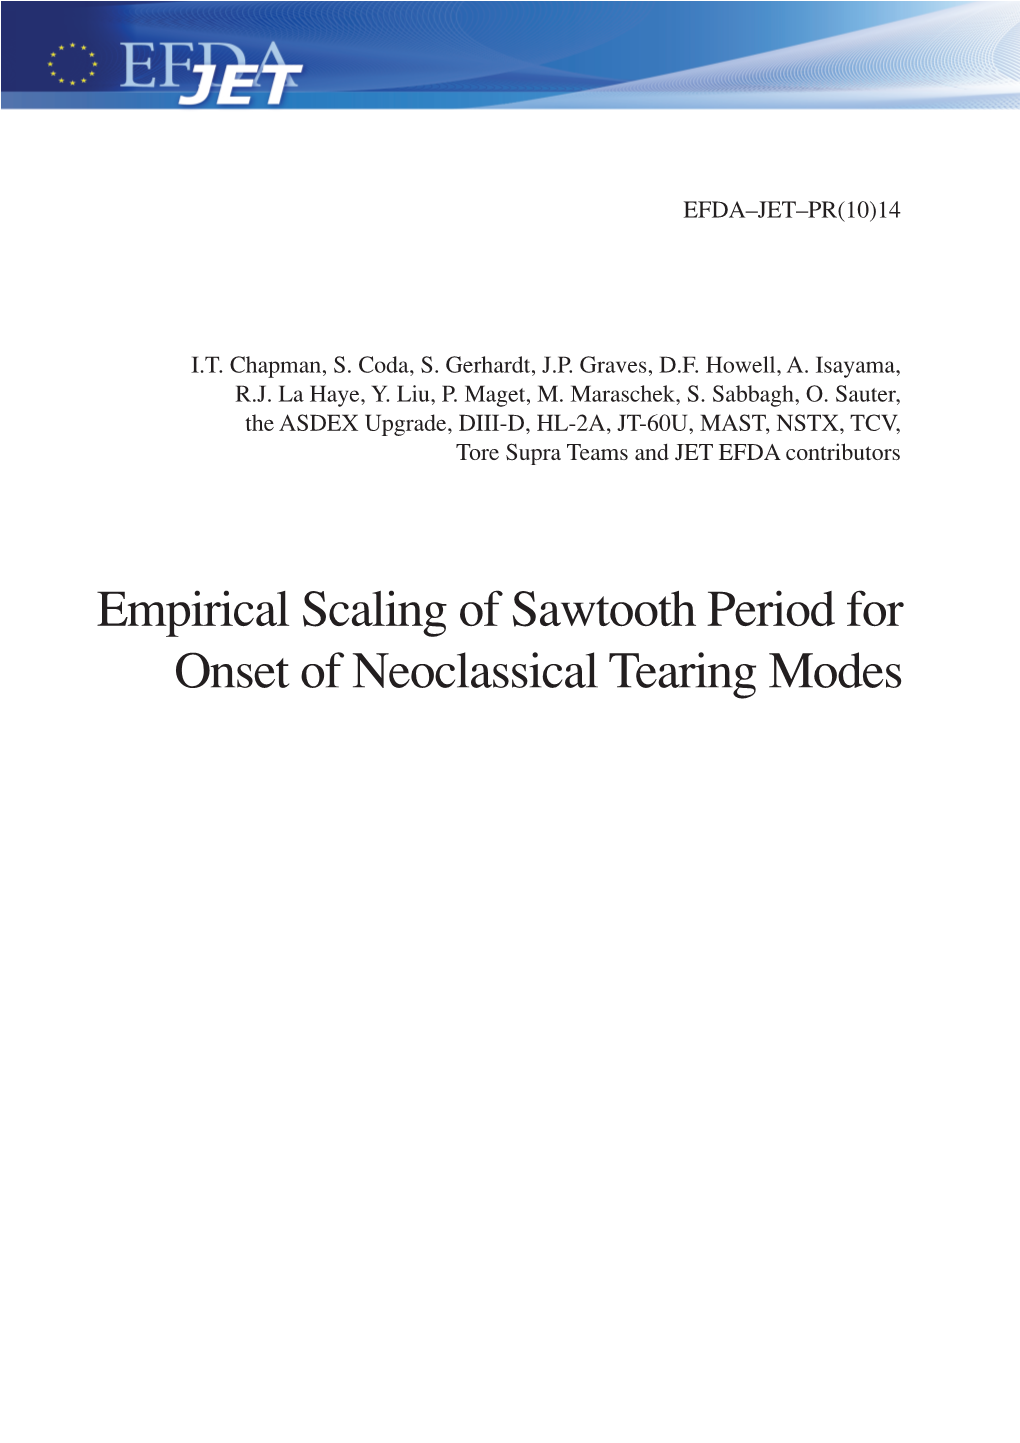 Empirical Scaling of Sawtooth Period for Onset of Neoclassical Tearing Modes “This Document Is Intended for Publication in the Open Literature